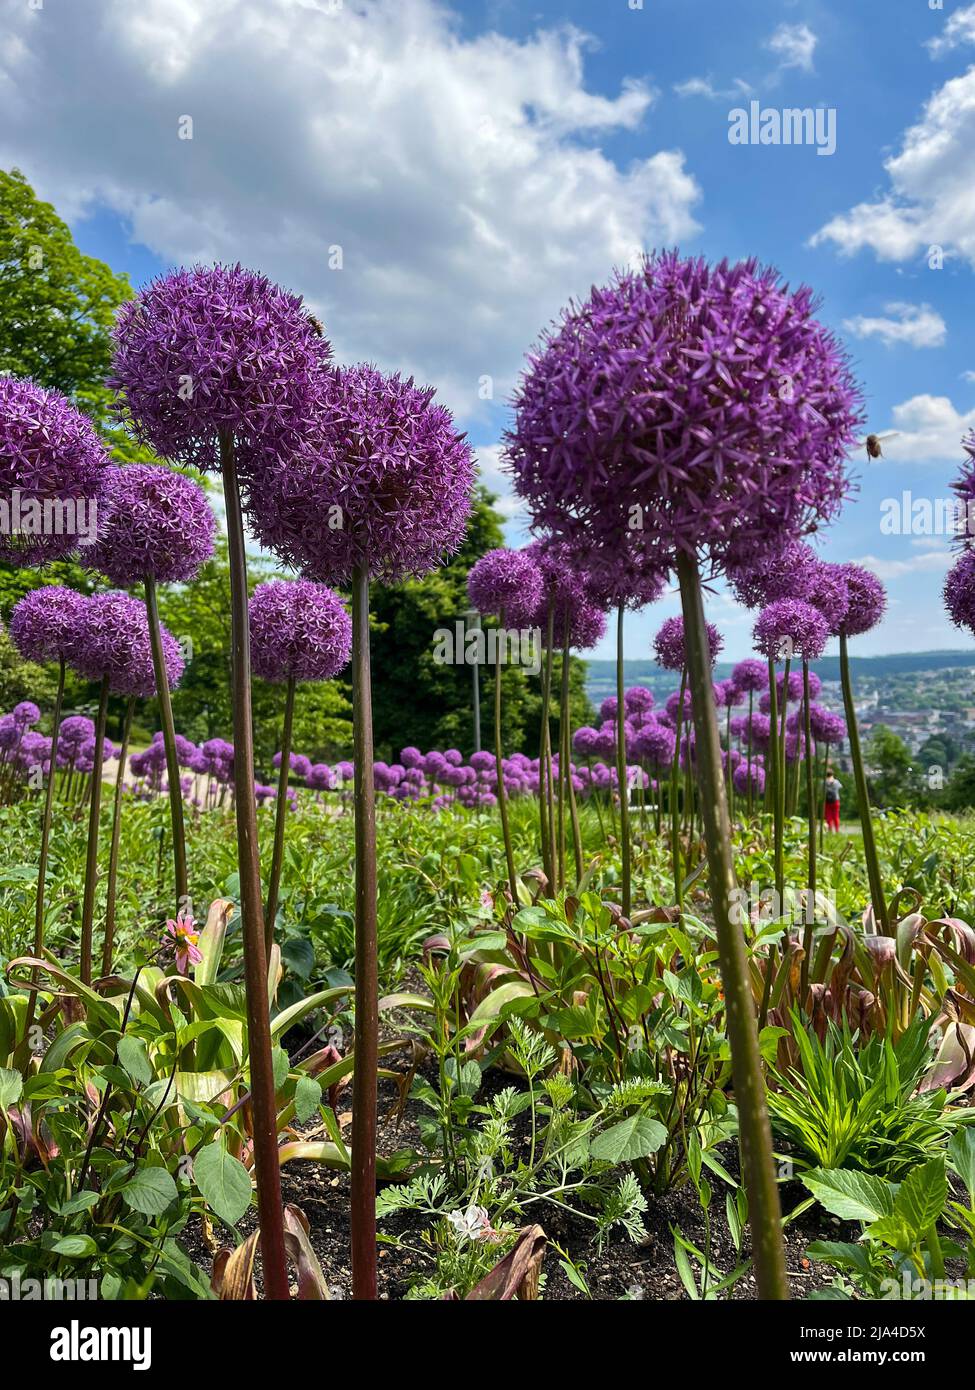 Giant Onion, Allium Giganteum, Flower in the public park Nordpark in Wuppertal, Germany in spring against a blue sky. Portrait. Stock Photo